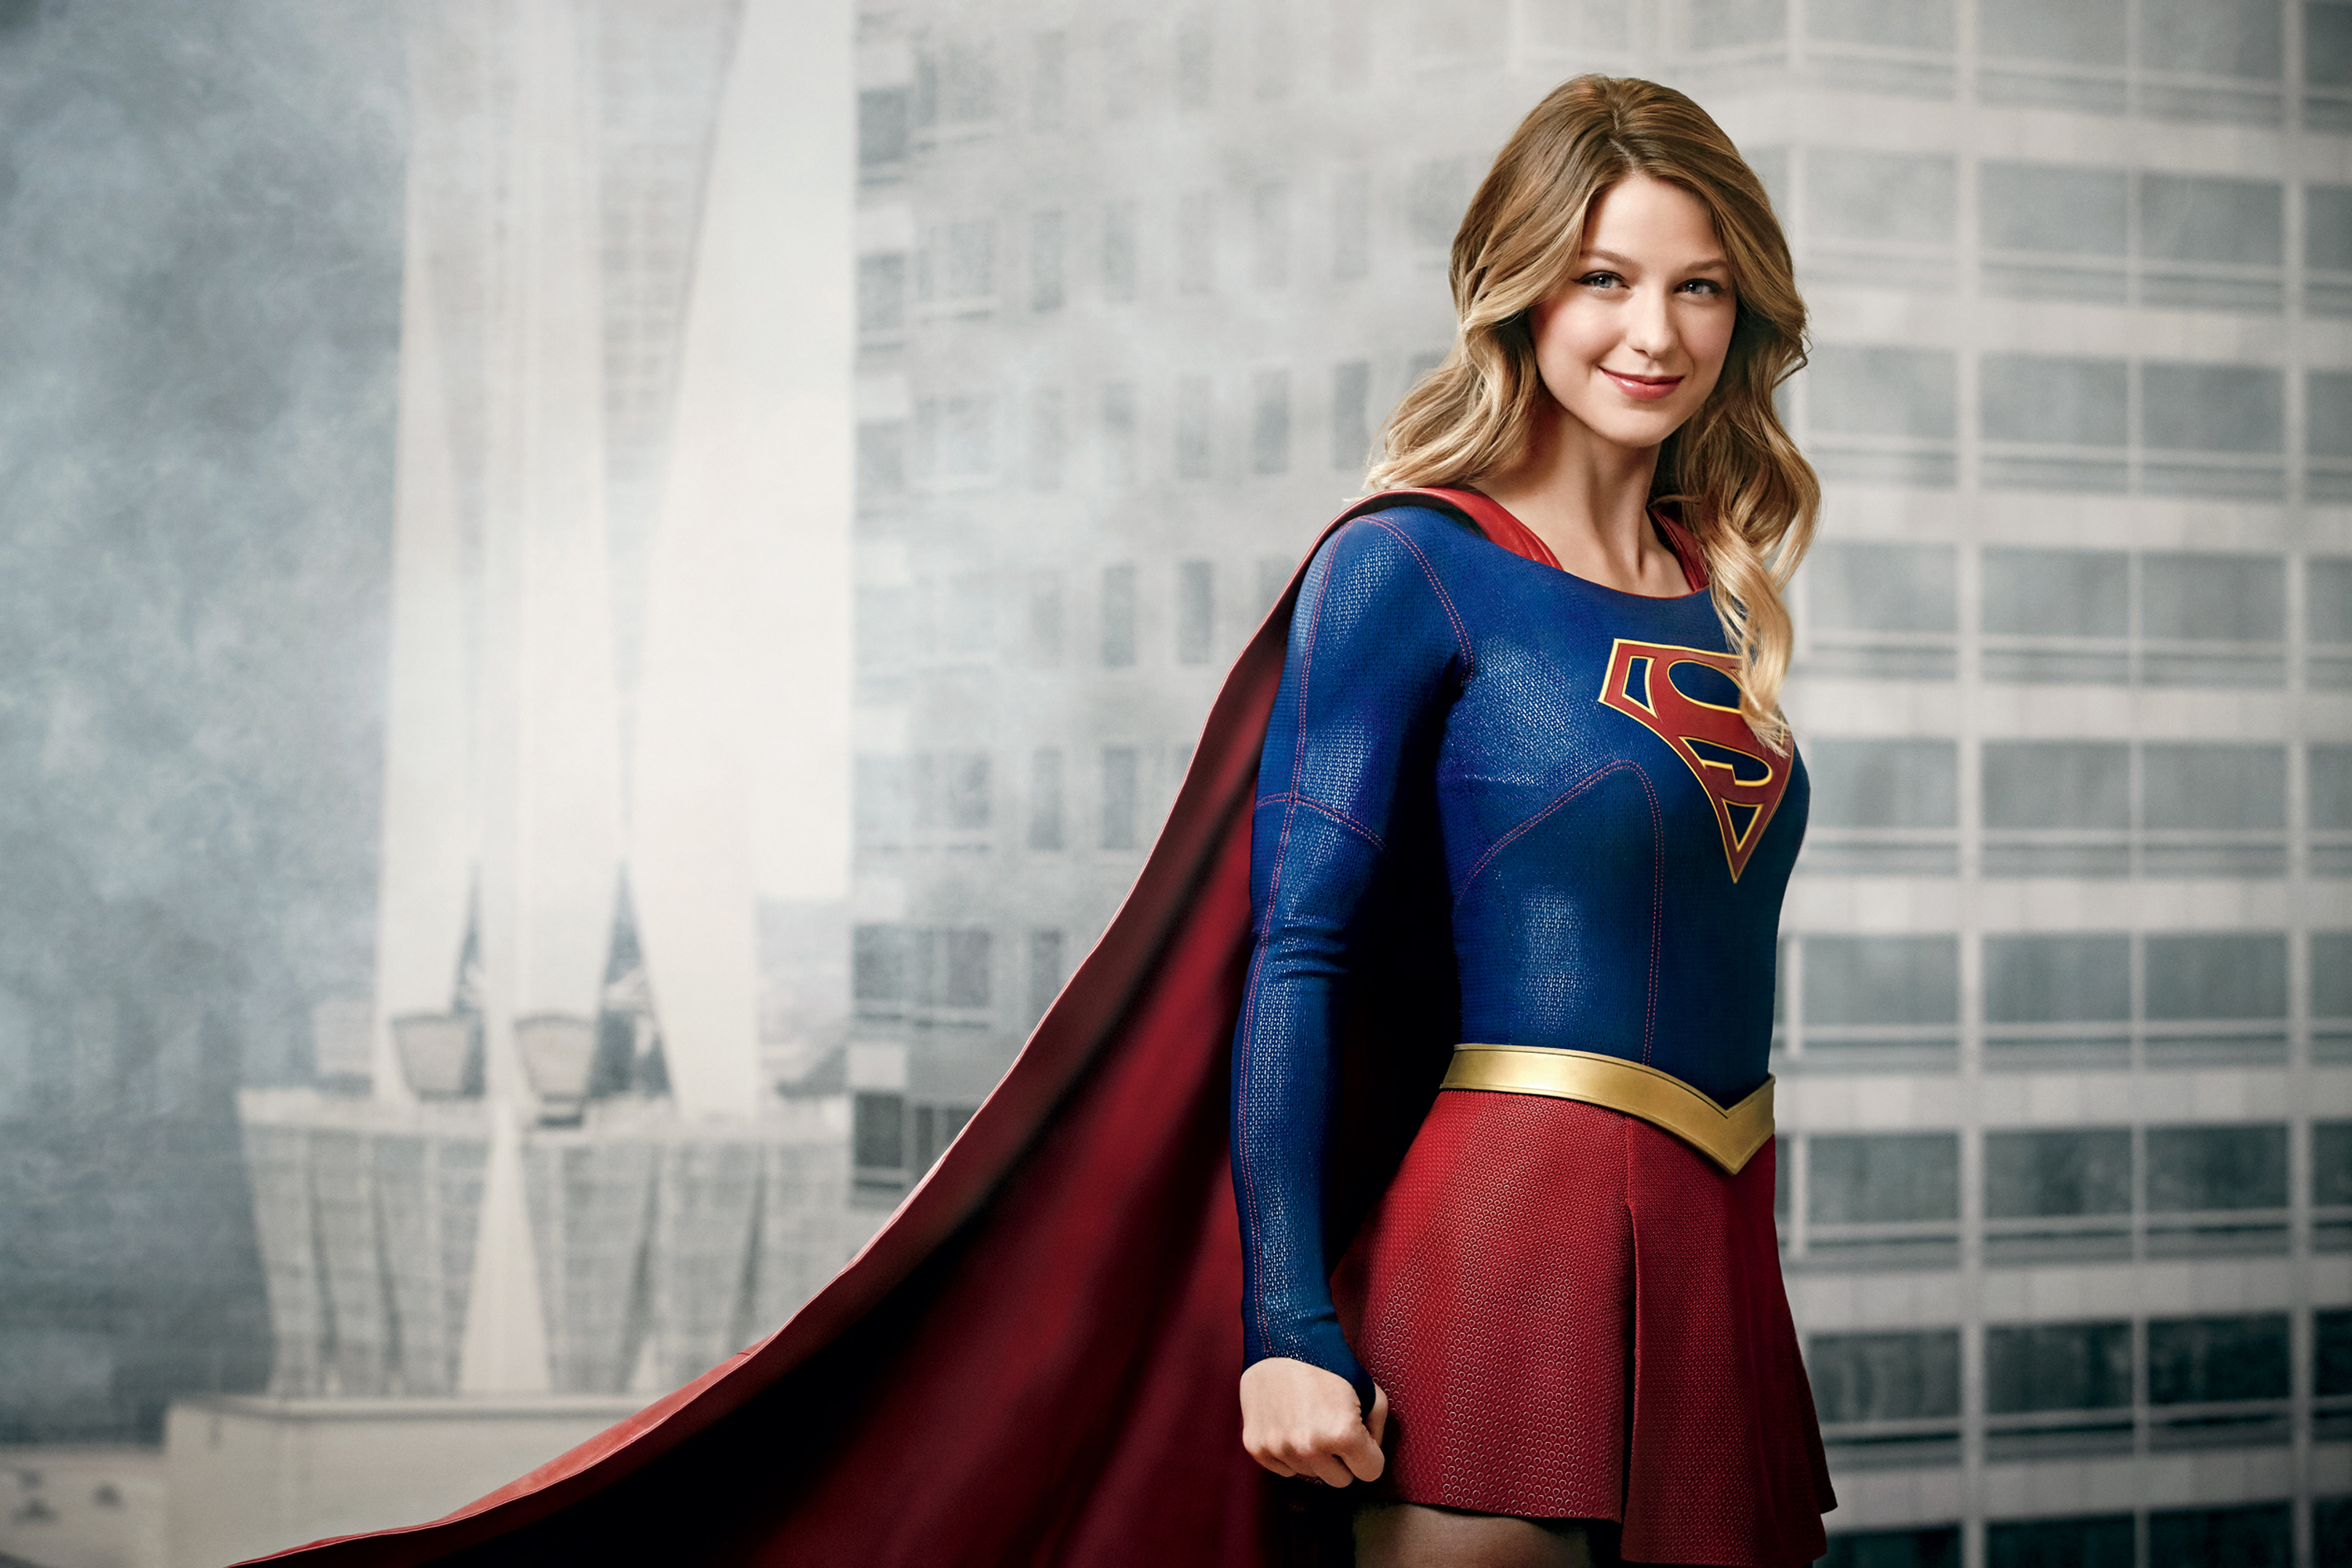 Supergirl Wallpapers – Supergirl: Maid of Might